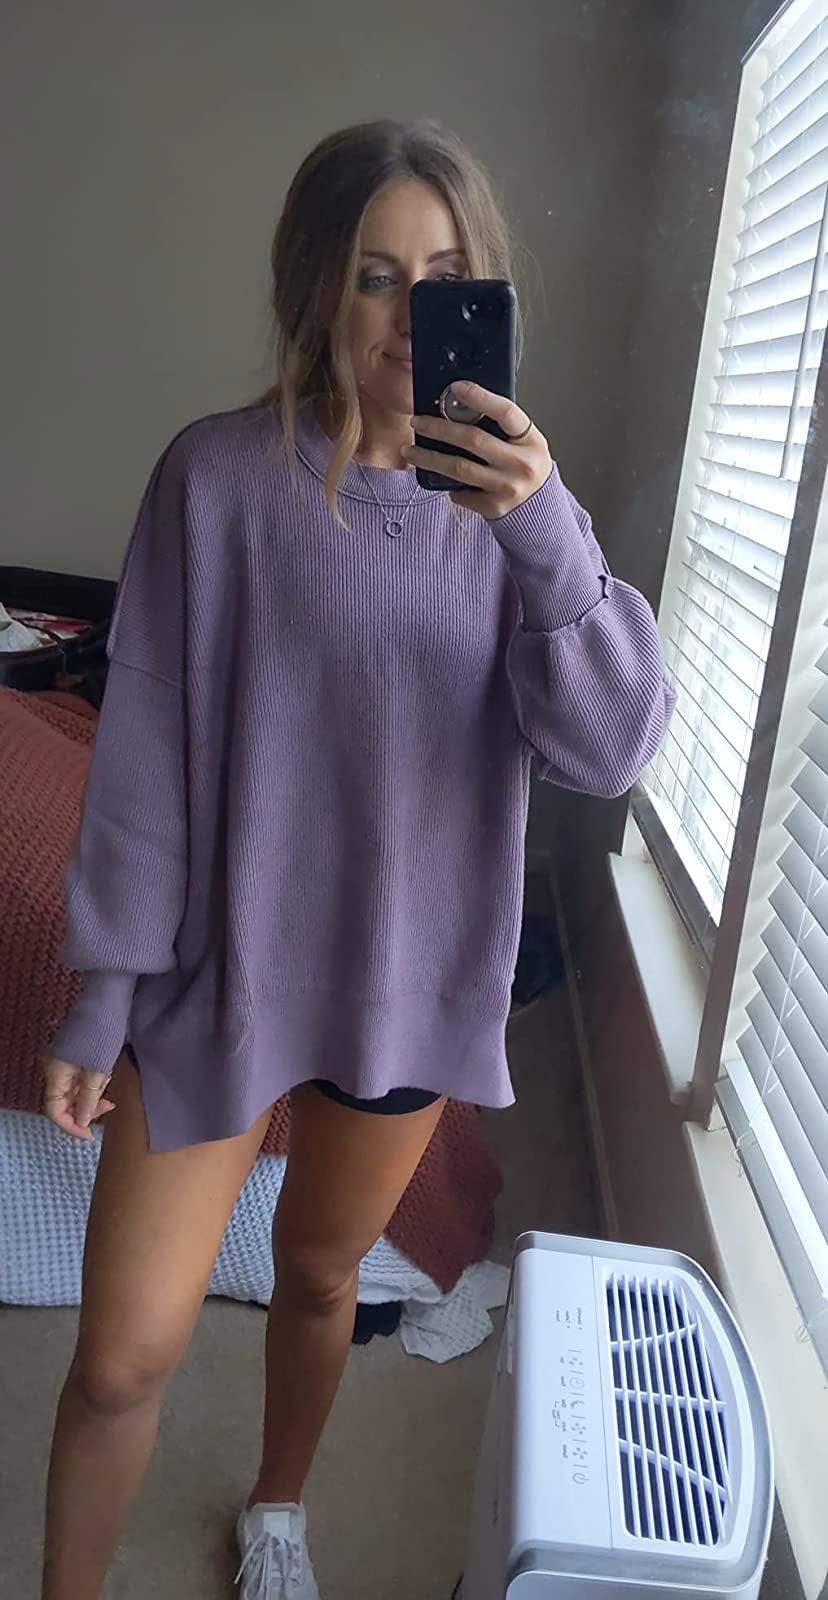 Purple Oversized Sweater with Leggings Outfits (3 ideas & outfits